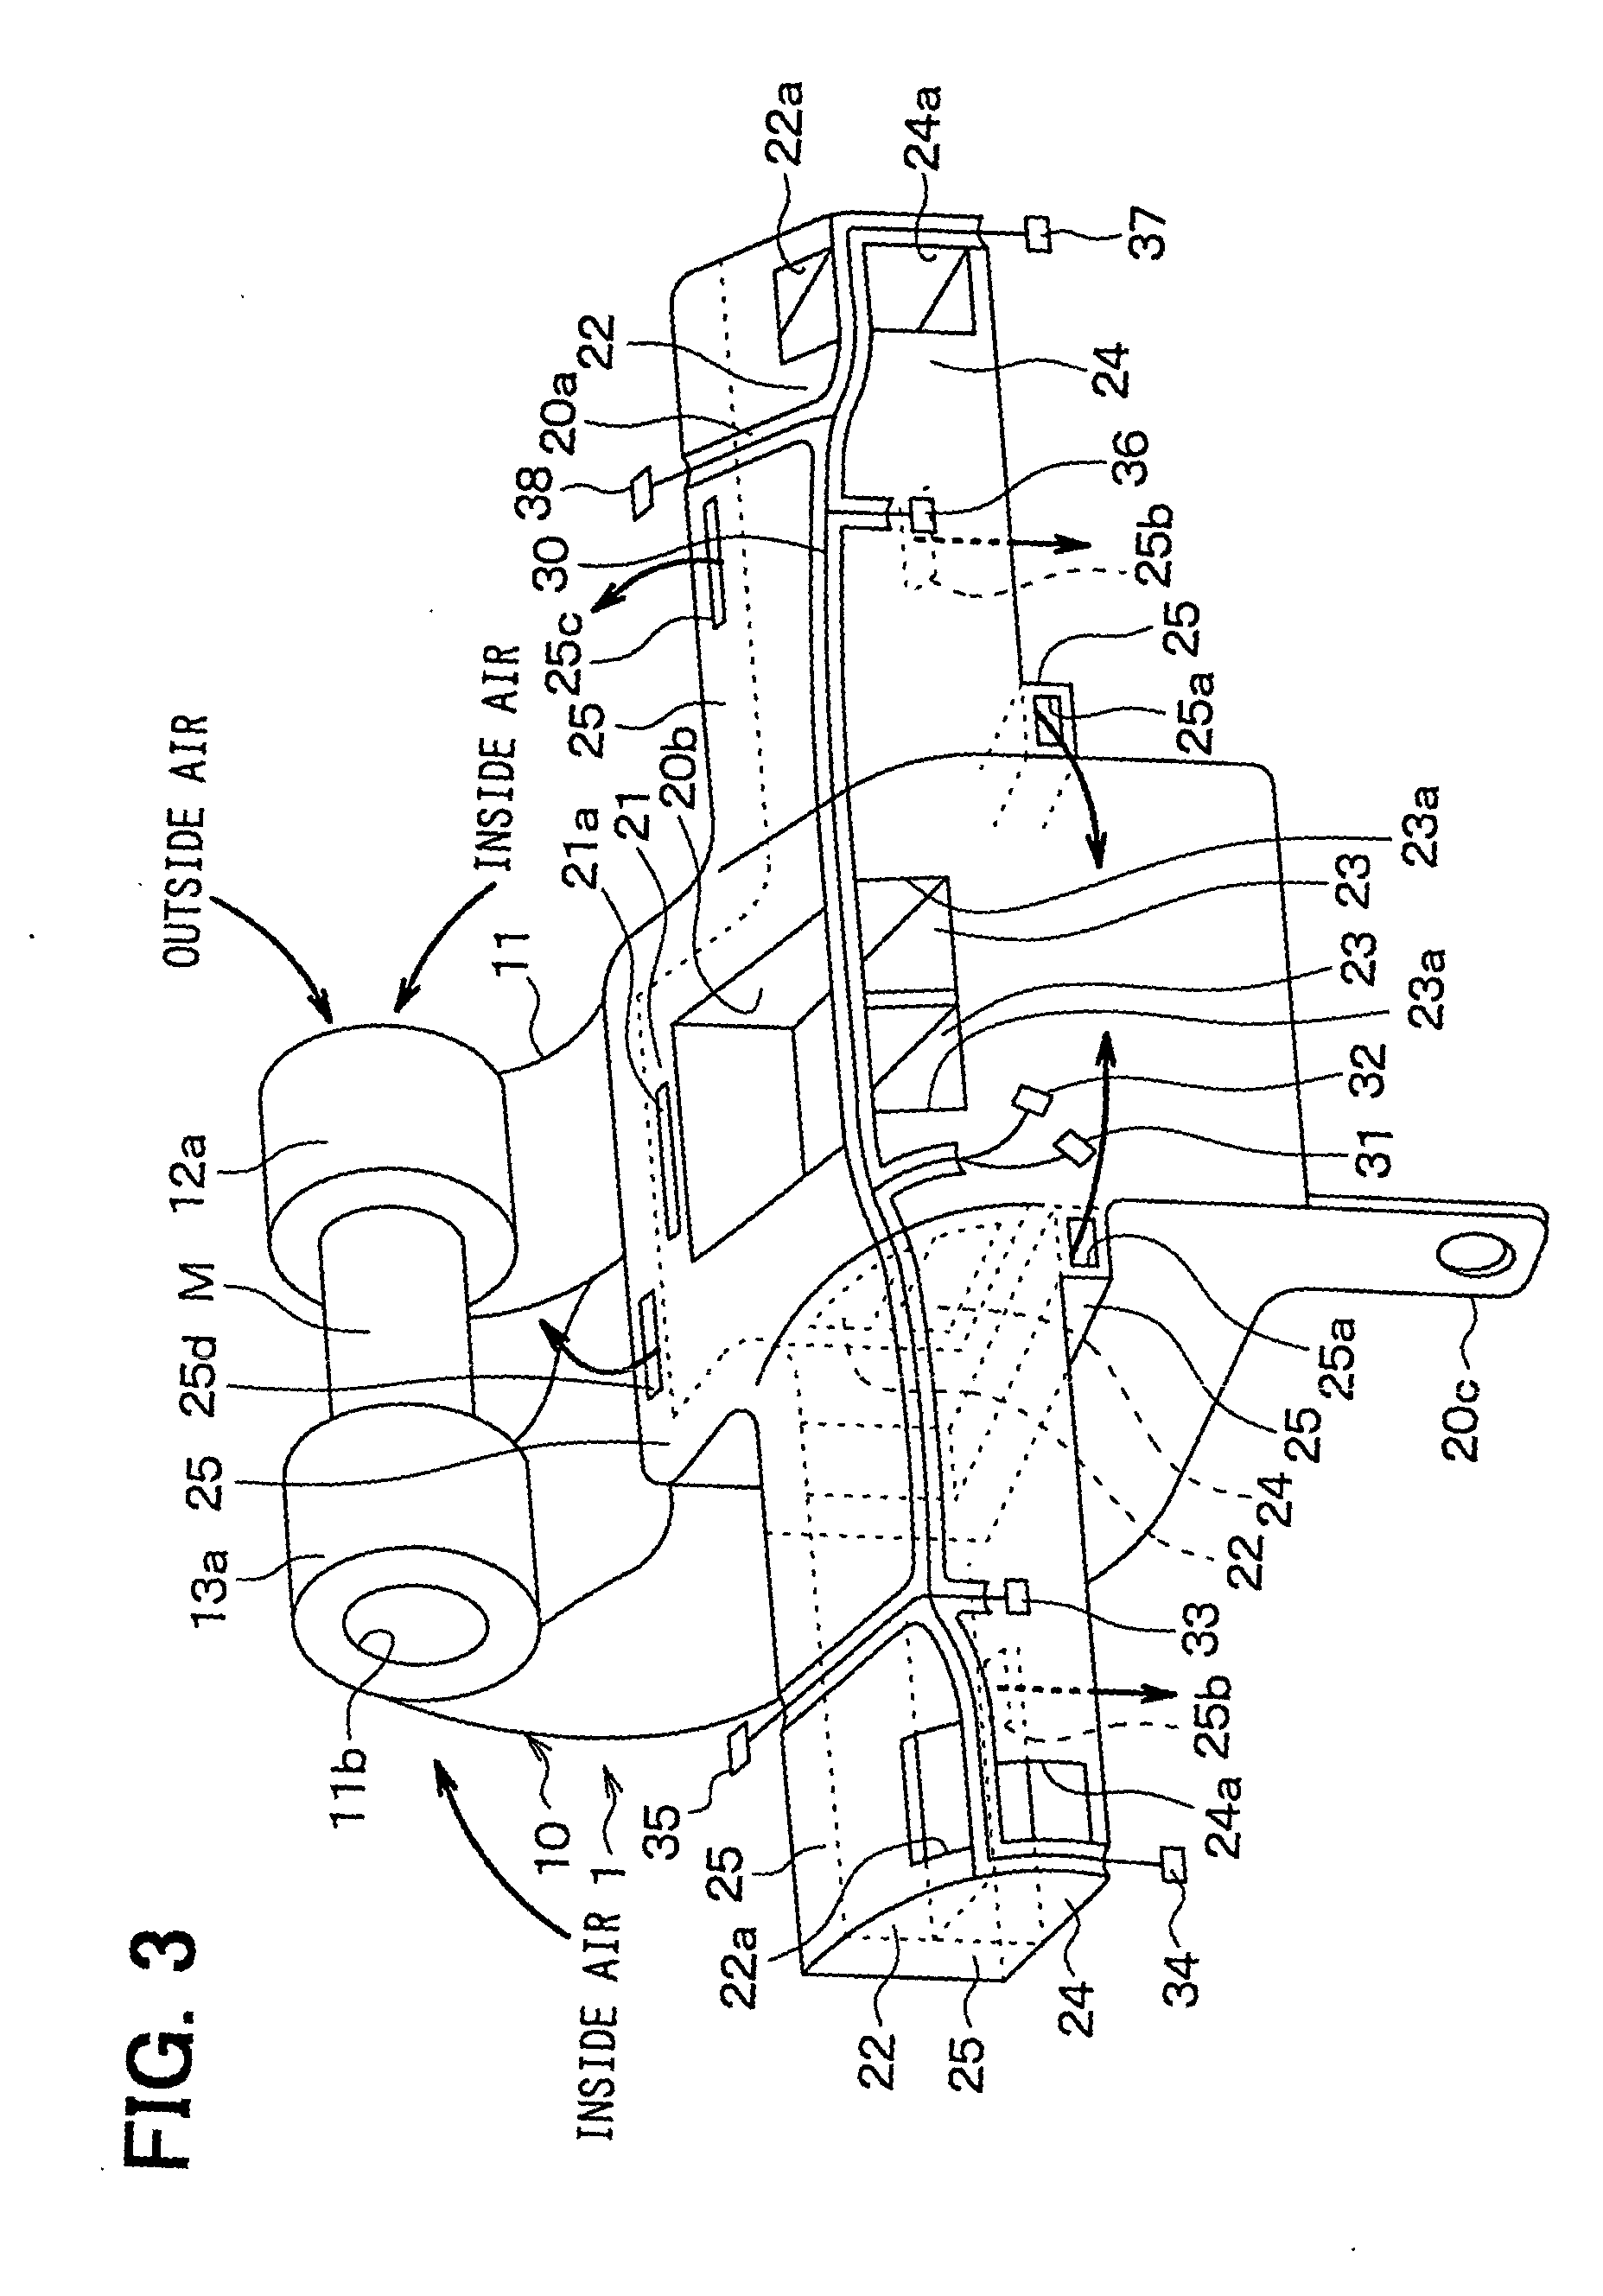 Cooling structure for cooling vehicle electronic unit